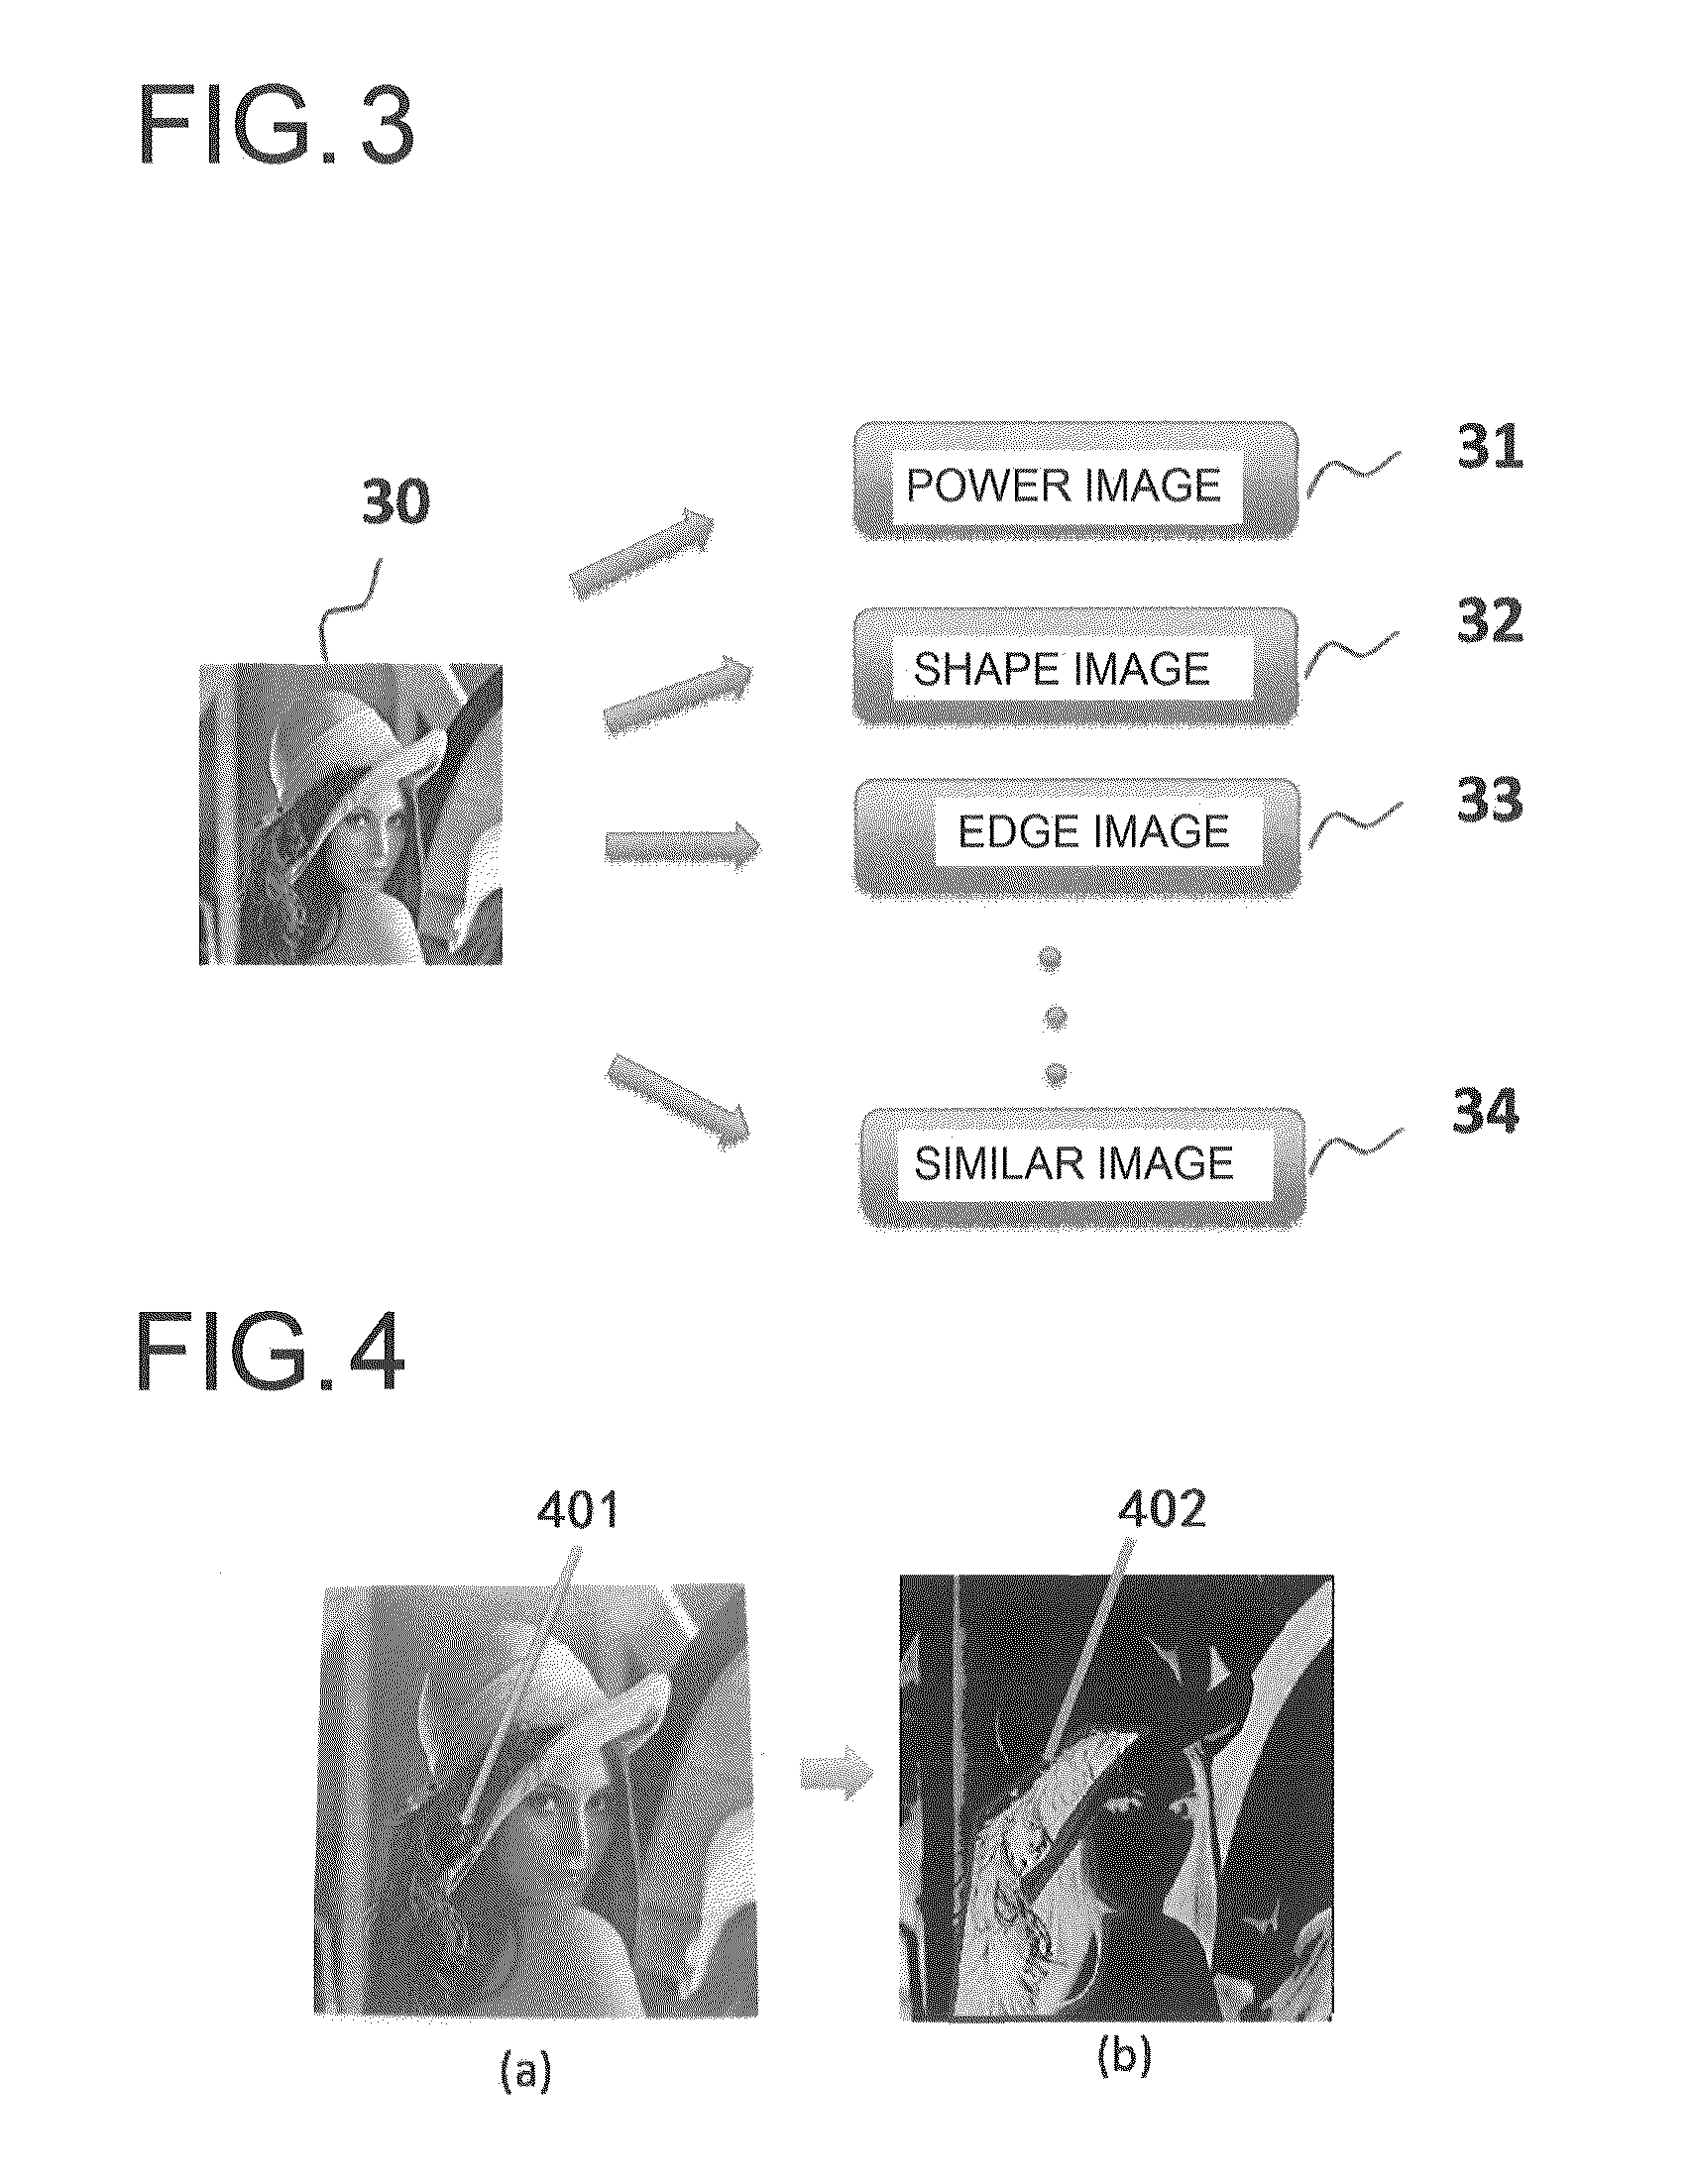 Code conversion device for image information, a code conversion method for the image information, a system for providing image related information using an image code, a code conversion program for the image information, and a recording medium in which the program is recorded